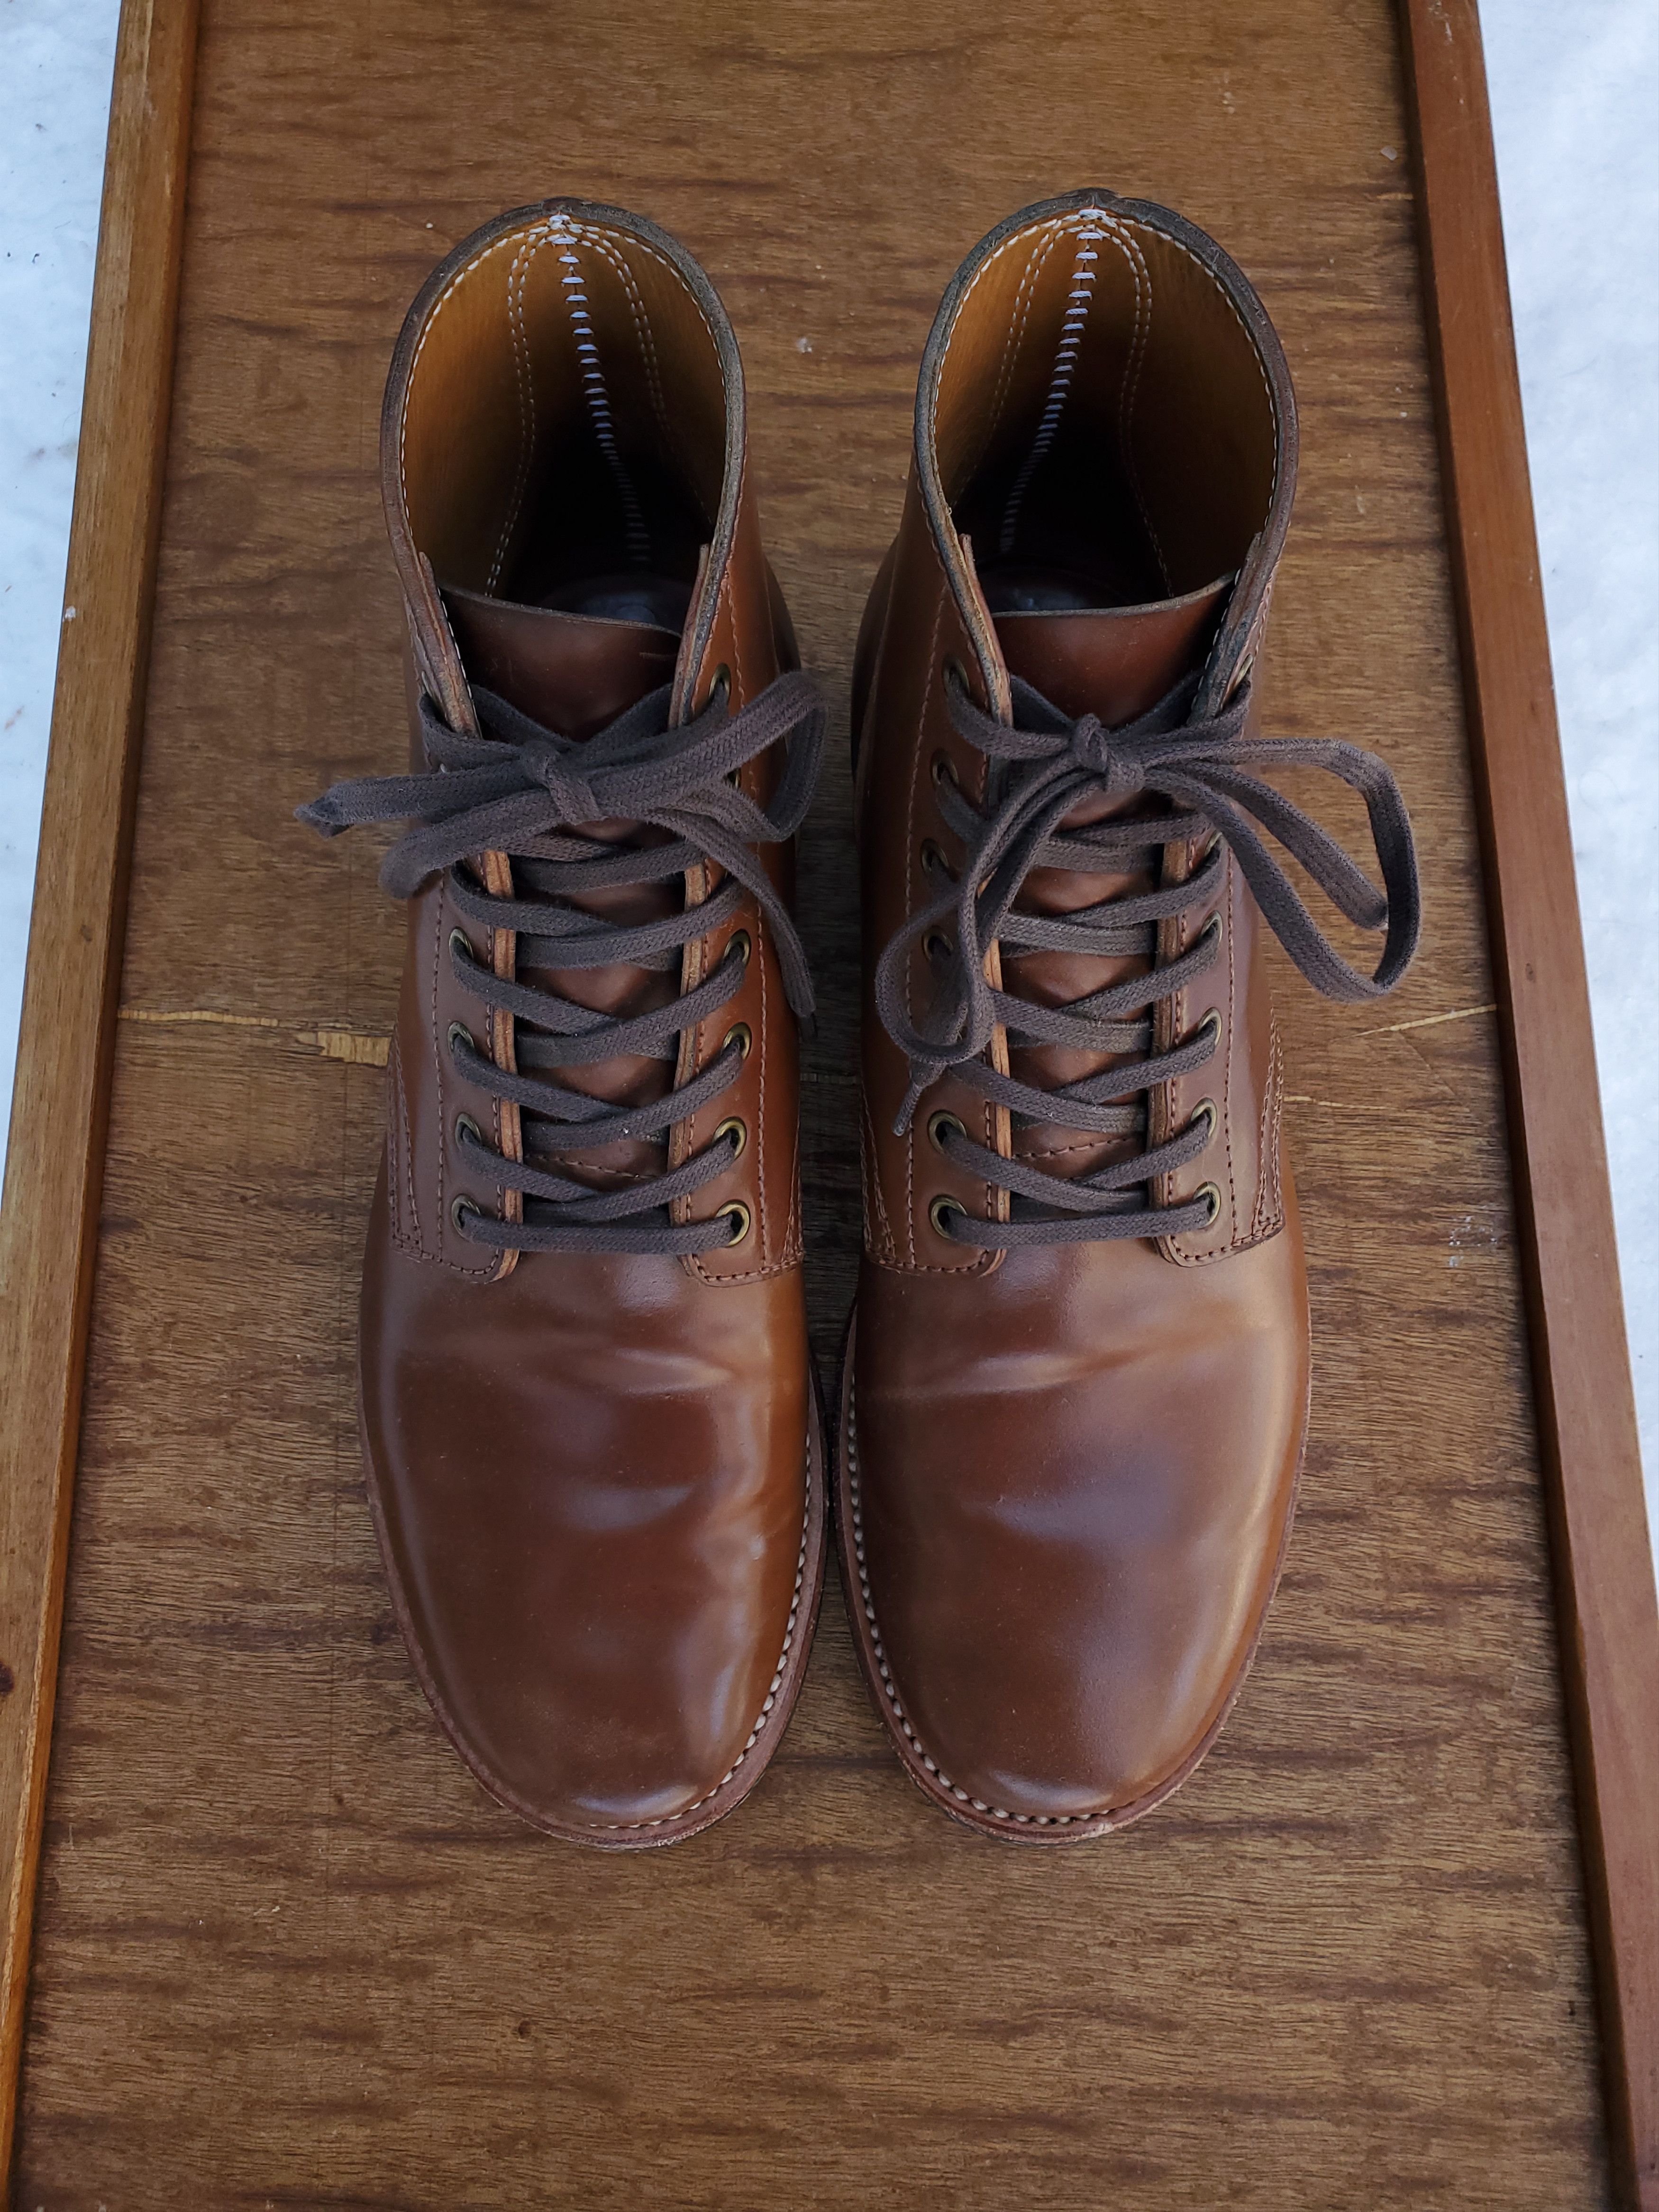 Other QuanShoemaker Natural Shell Cordovan Boots Size US 6.5 / EU 39-40 - 2 Preview